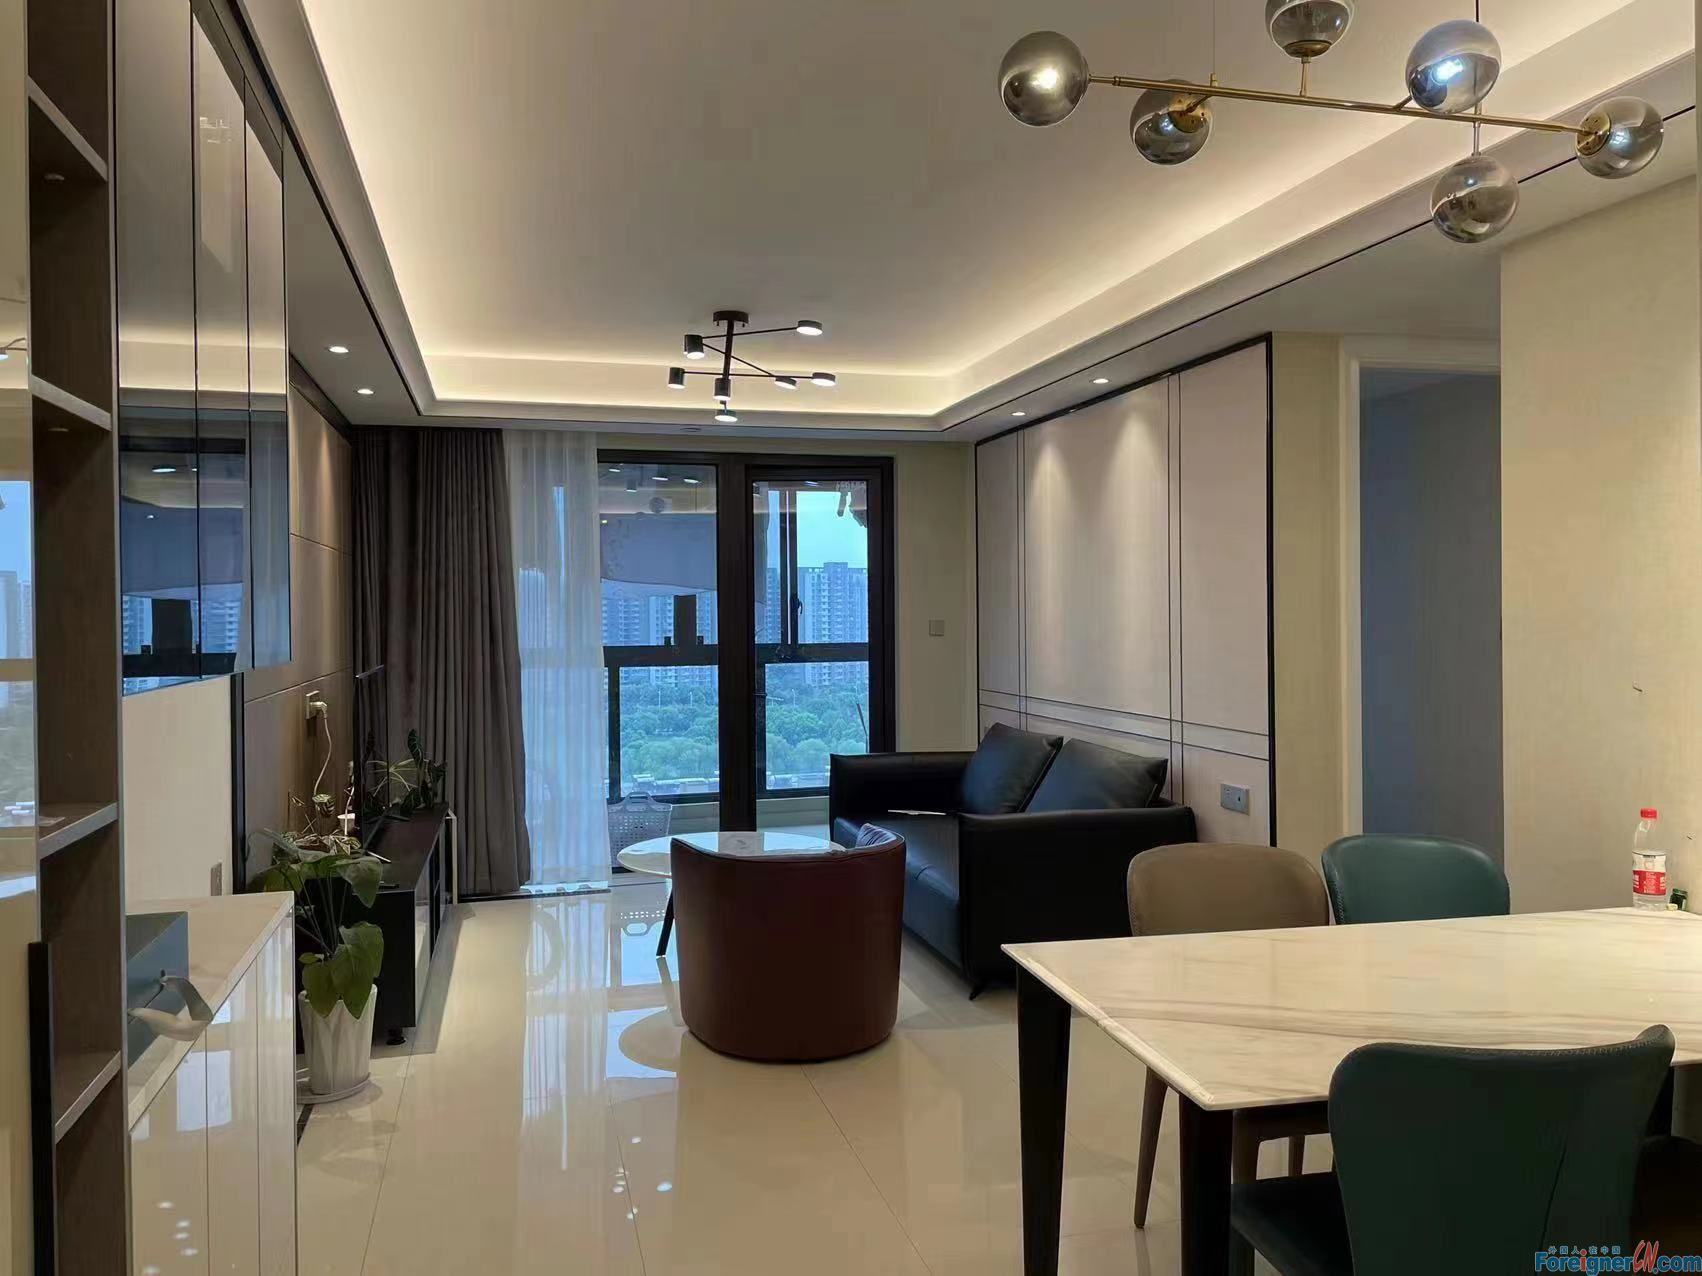 Spacious!!! Brand new flat rent in Suzhou/3 bedrooms and 2 bathrooms/ central AC, Brand new /Eton House international school/subway station 